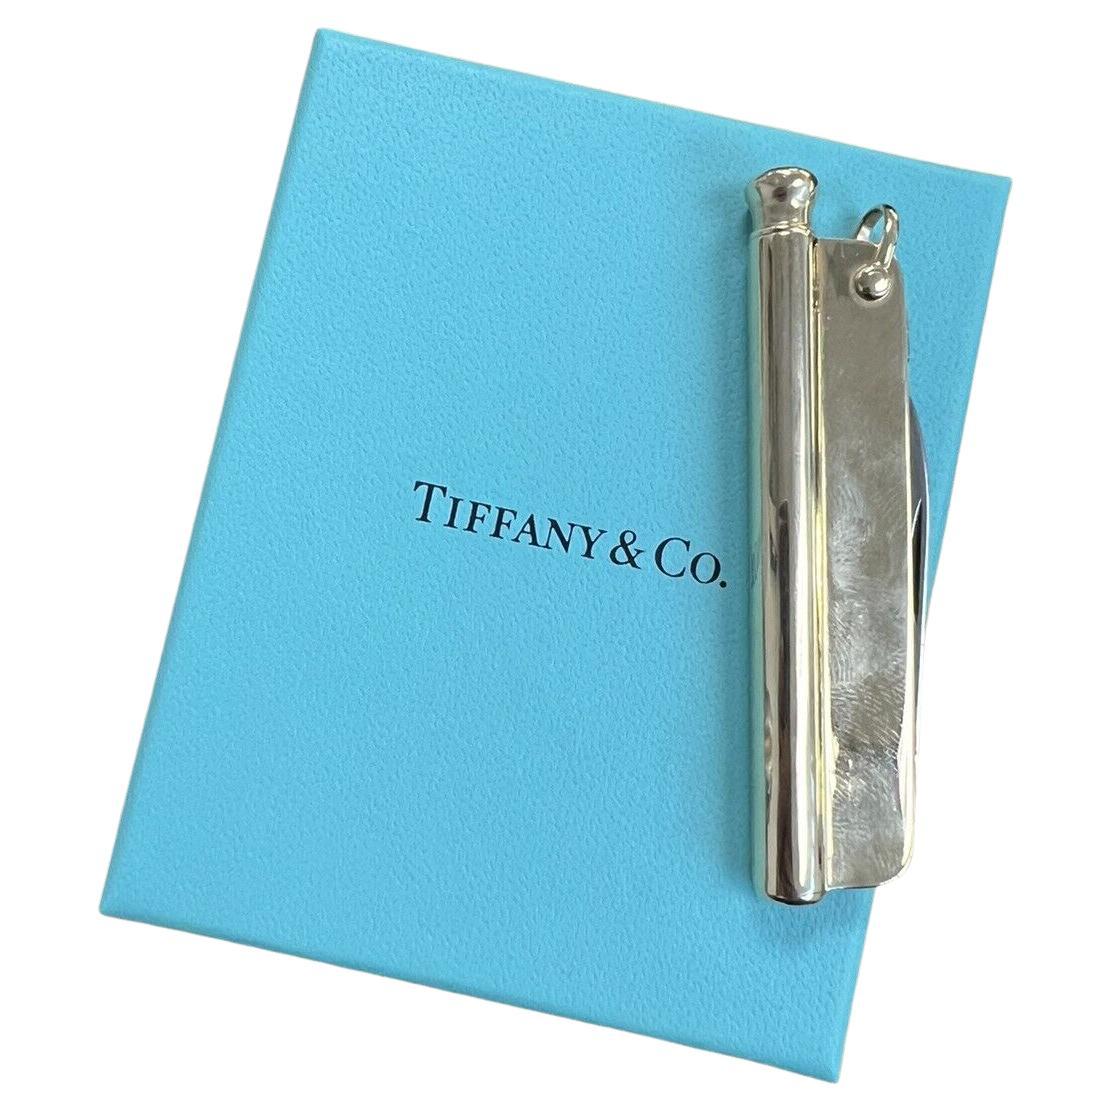 Tiffany & Co. is well-known for its stunning creations of timeless